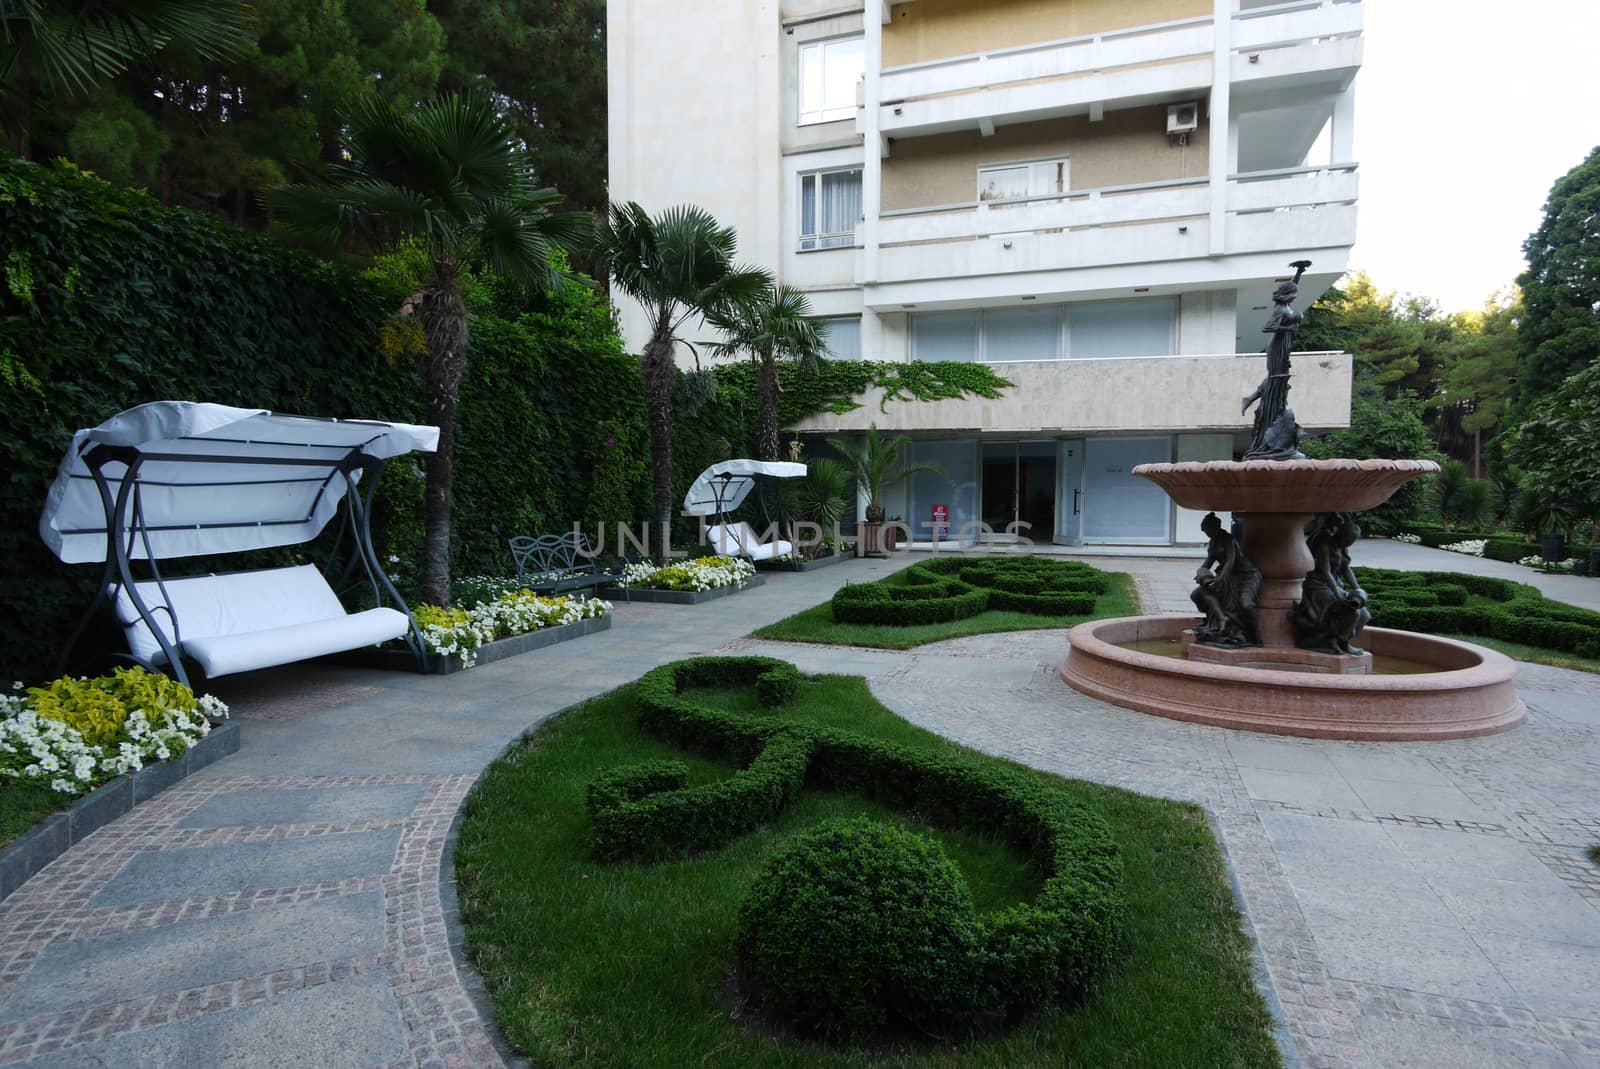 A chic interior courtyard near the hotel with an elegant fountain with sculptures by a designer lawn and white benches with a canopy with beautiful flowers growing next to it.